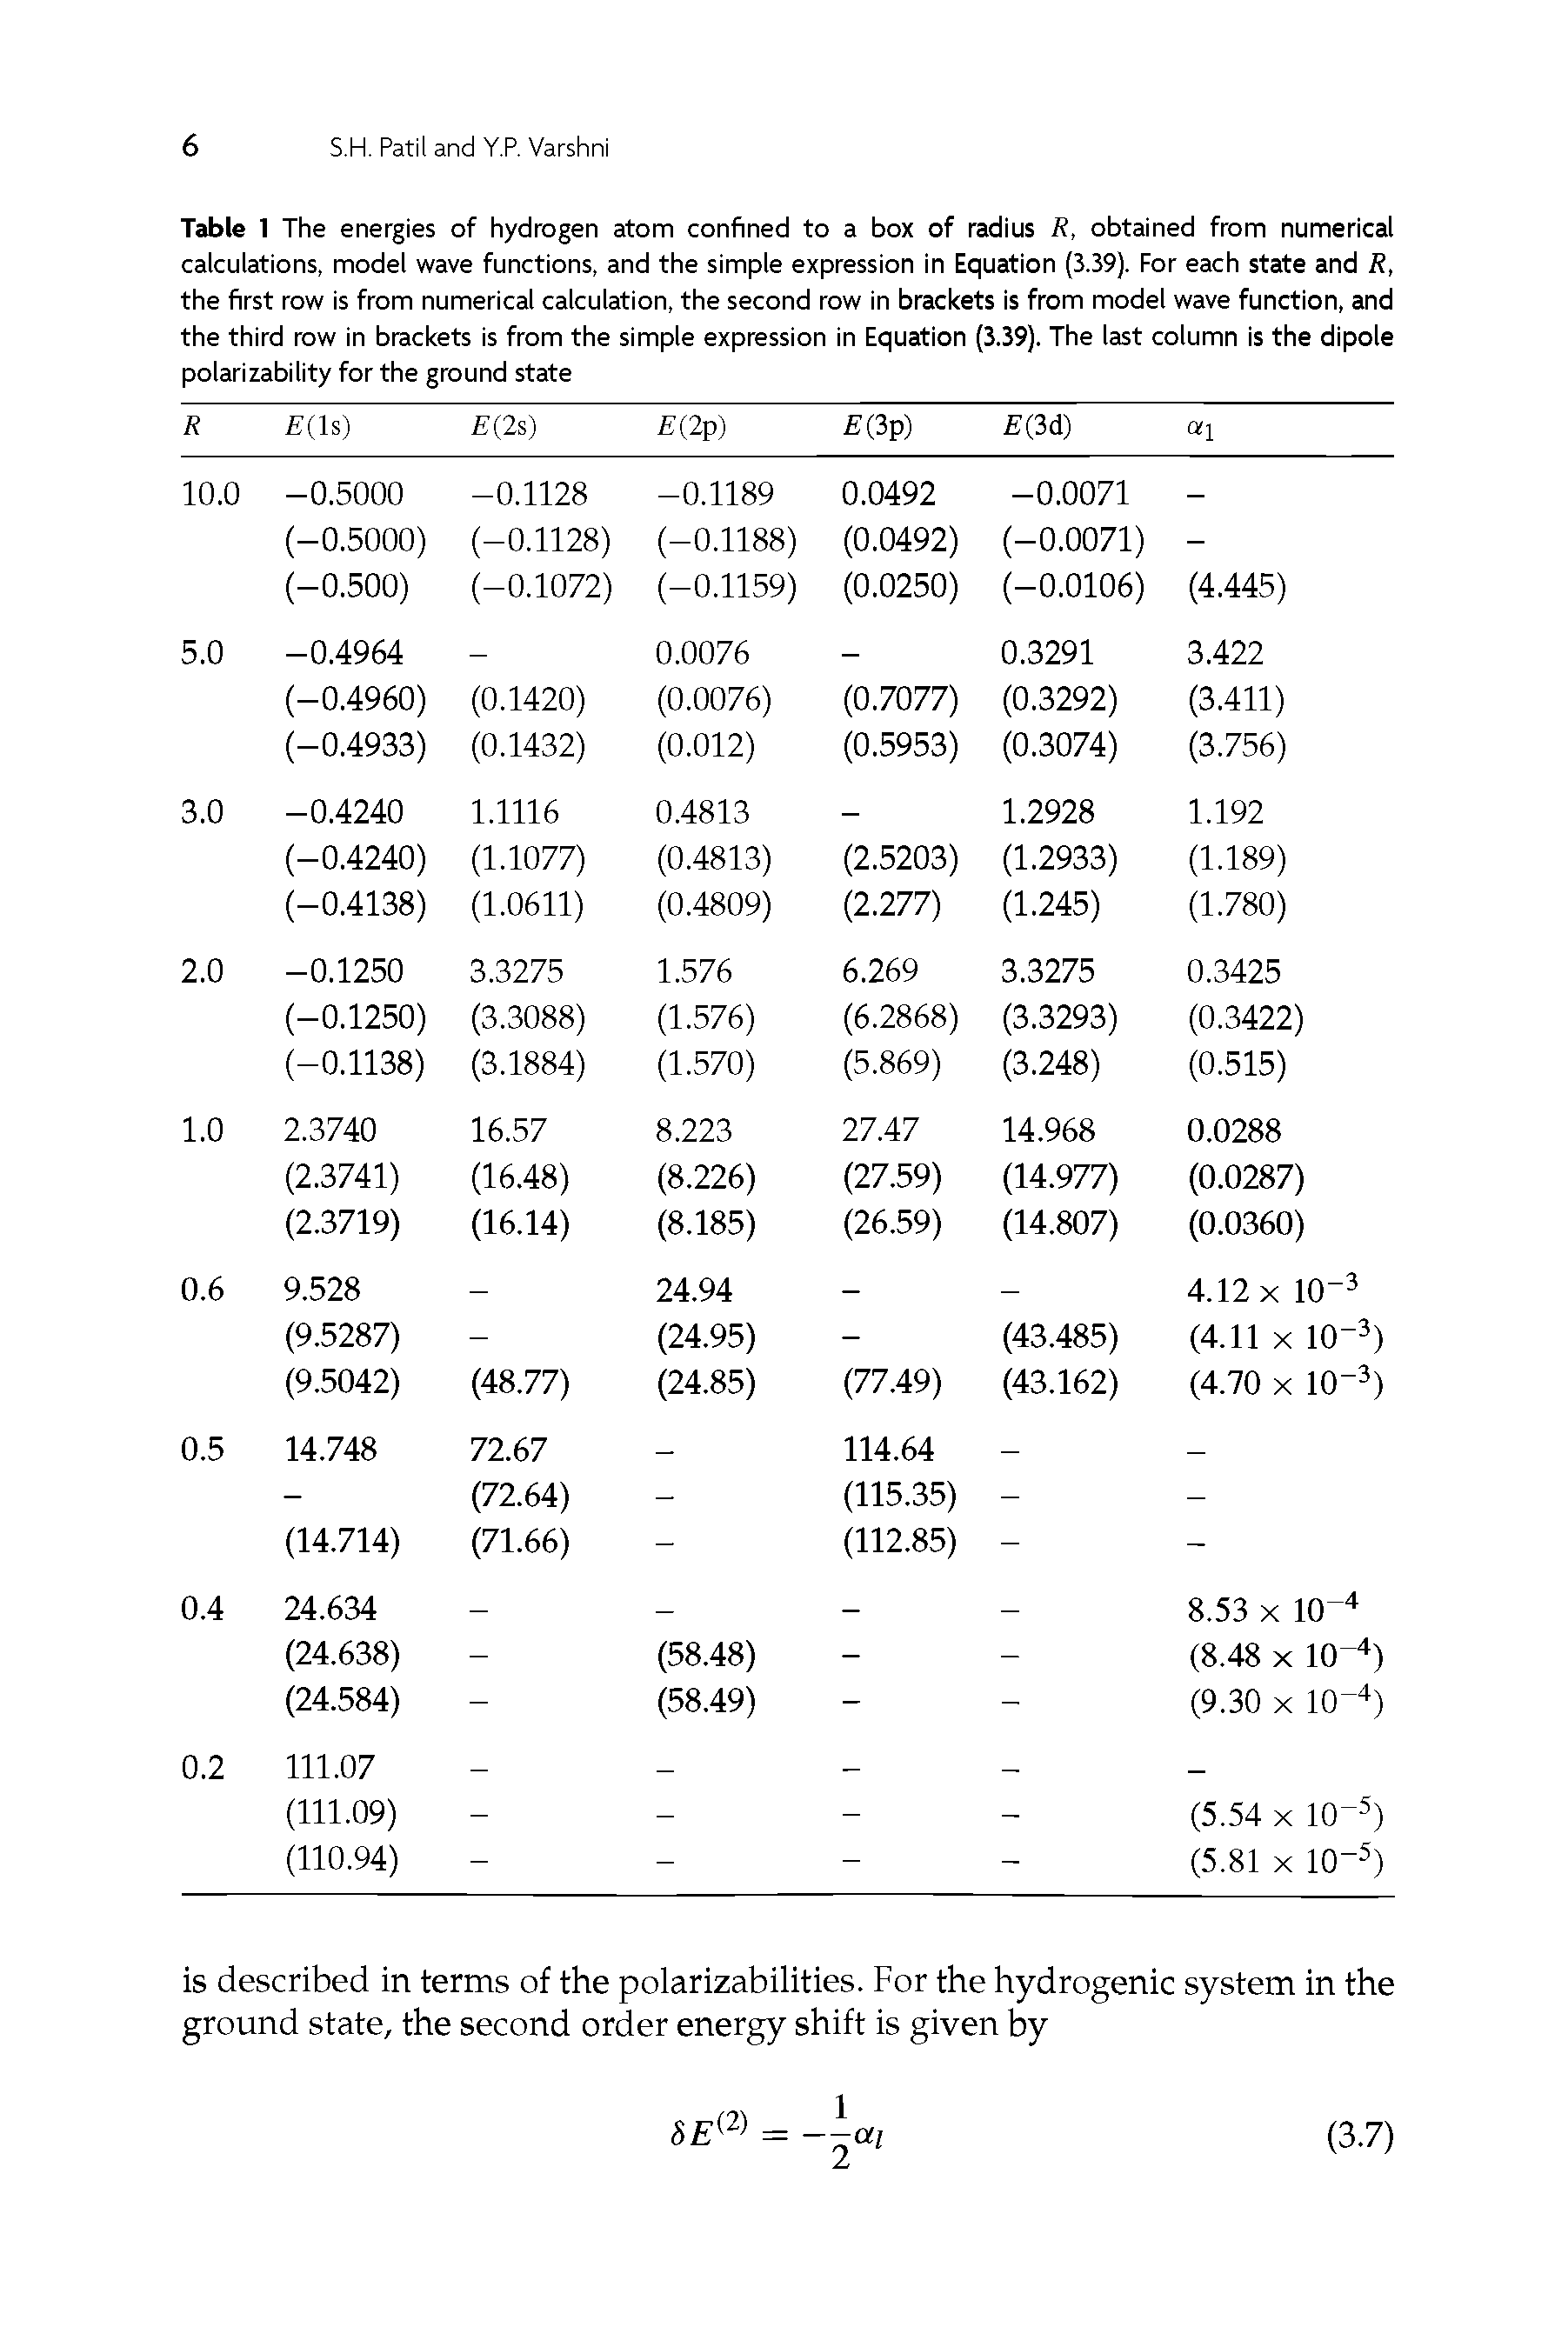 Table 1 The energies of hydrogen atom confined to a box of radius R, obtained from numerical calculations, model wave functions, and the simple expression in Equation (3.39). For each state and R, the first row is from numerical calculation, the second row in brackets is from model wave function, and the third row in brackets is from the simple expression in Equation (3.39). The last column is the dipole polarizability for the ground state...